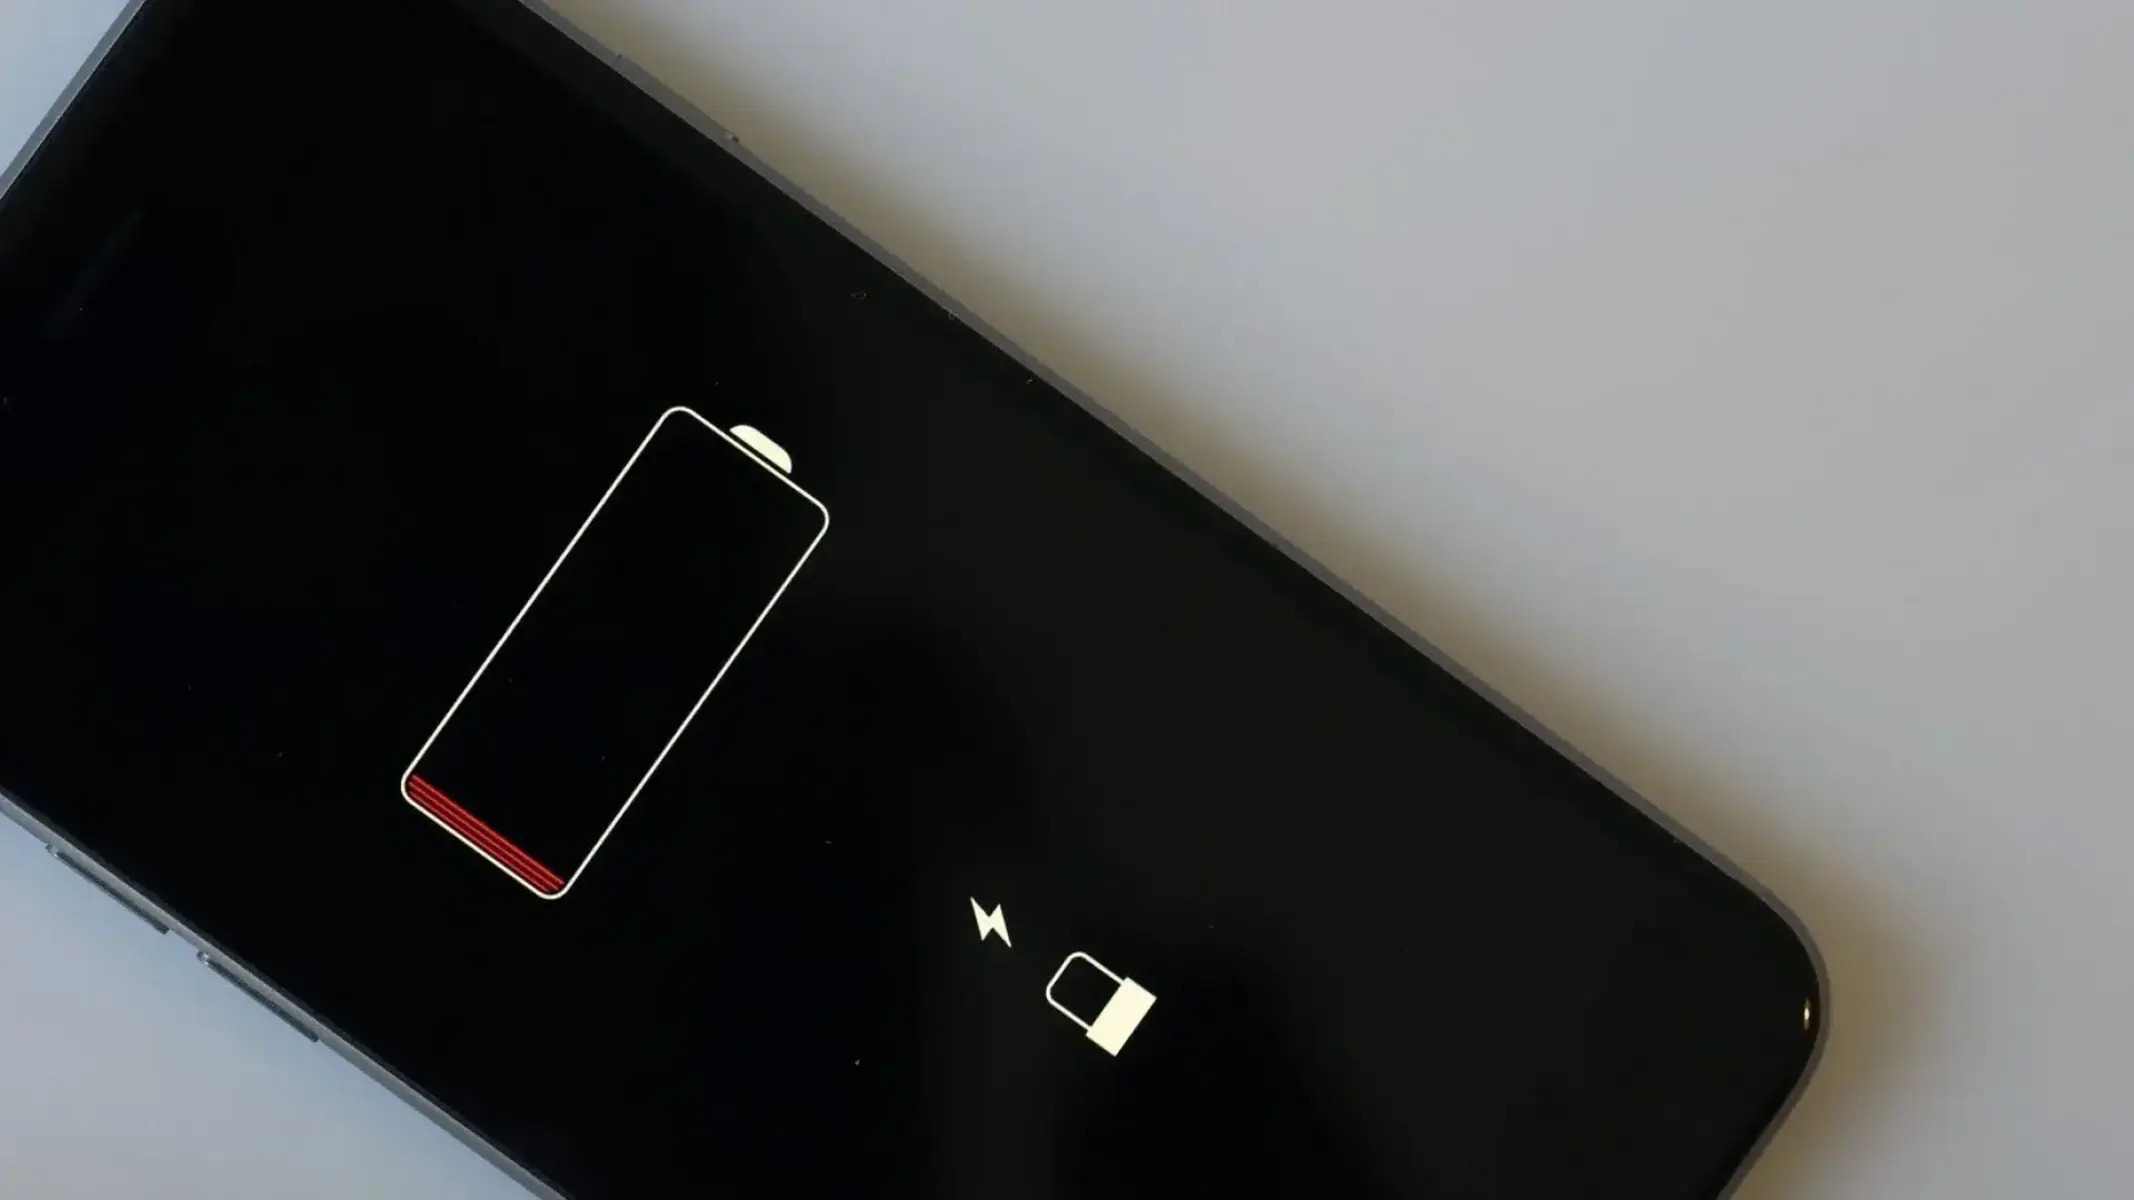 Rapid Battery Drain: Addressing IPhone 12 Fast Battery Depletion